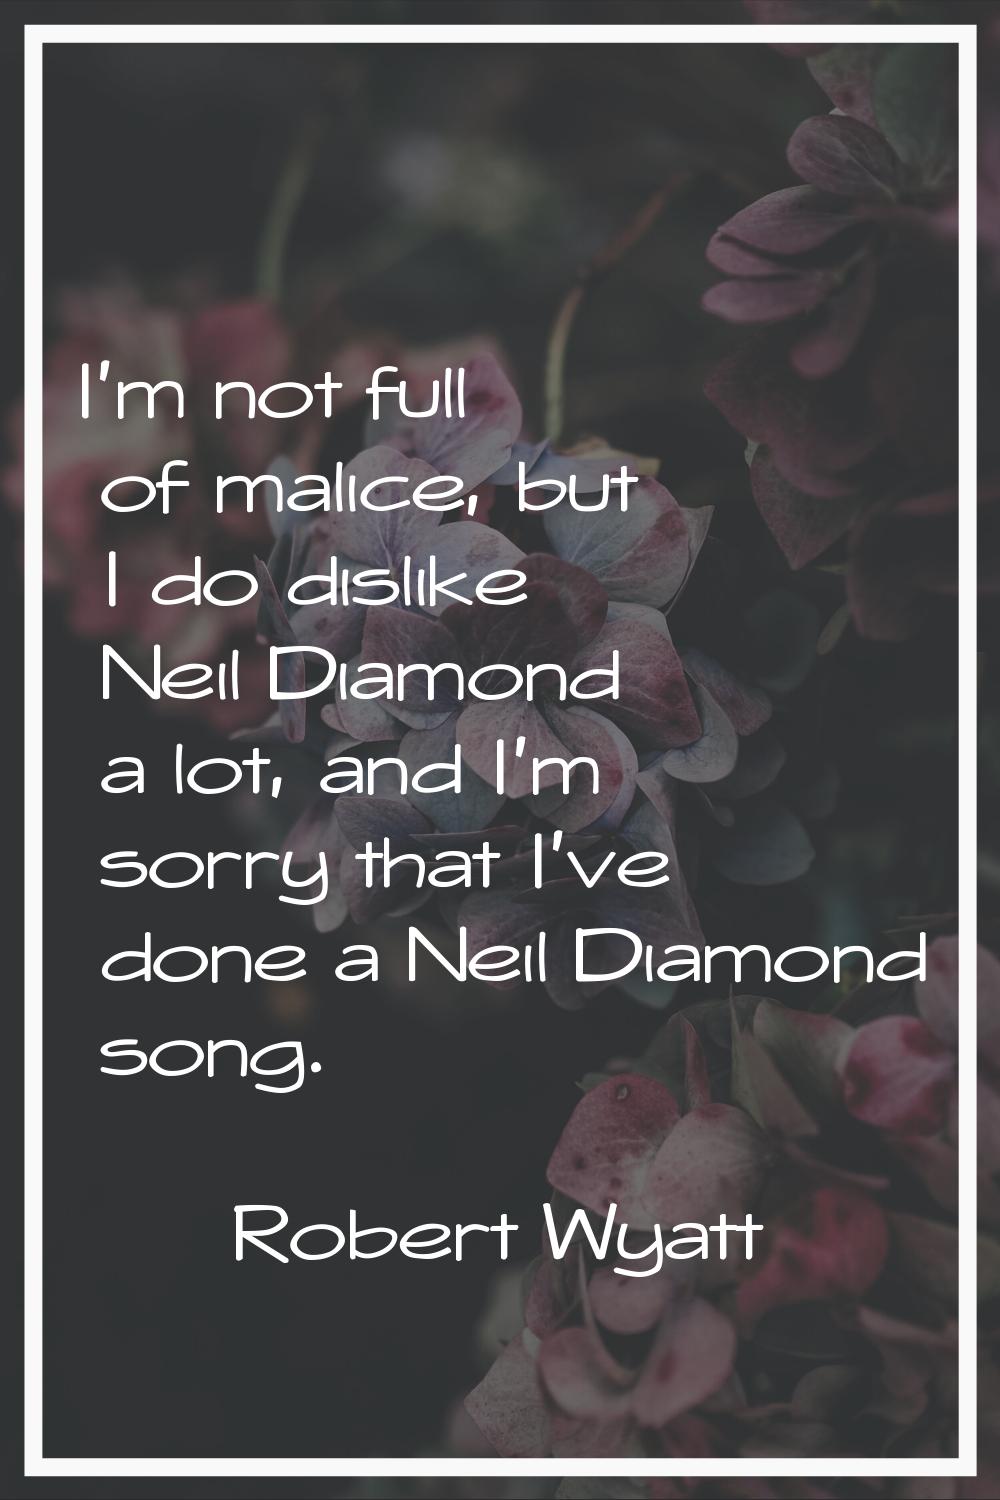 I'm not full of malice, but I do dislike Neil Diamond a lot, and I'm sorry that I've done a Neil Di